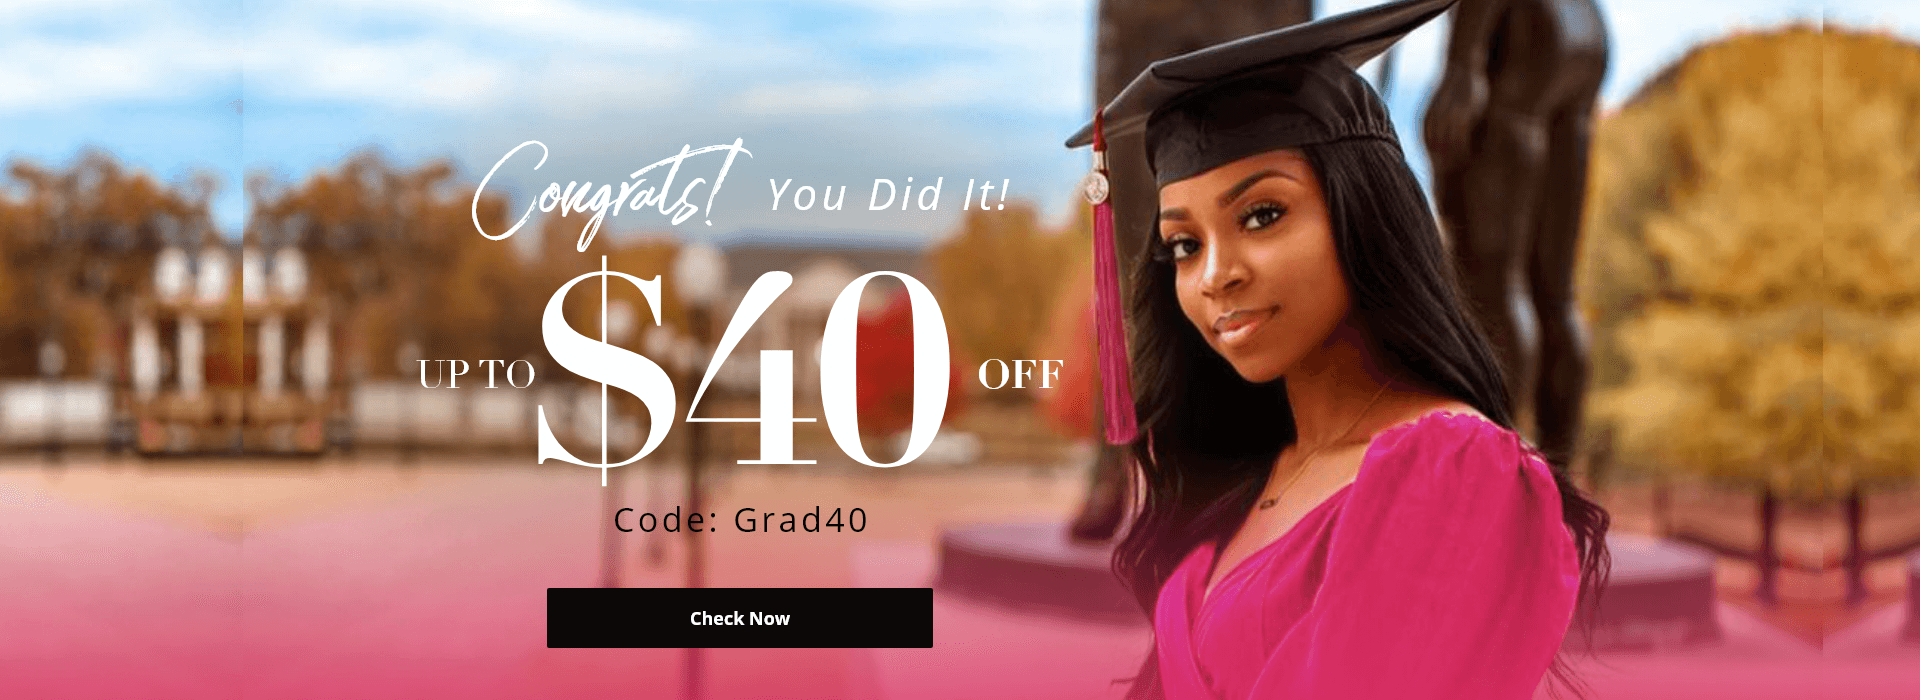 UNice Up To $40 Off With Code: Grad40, Buy More Save More